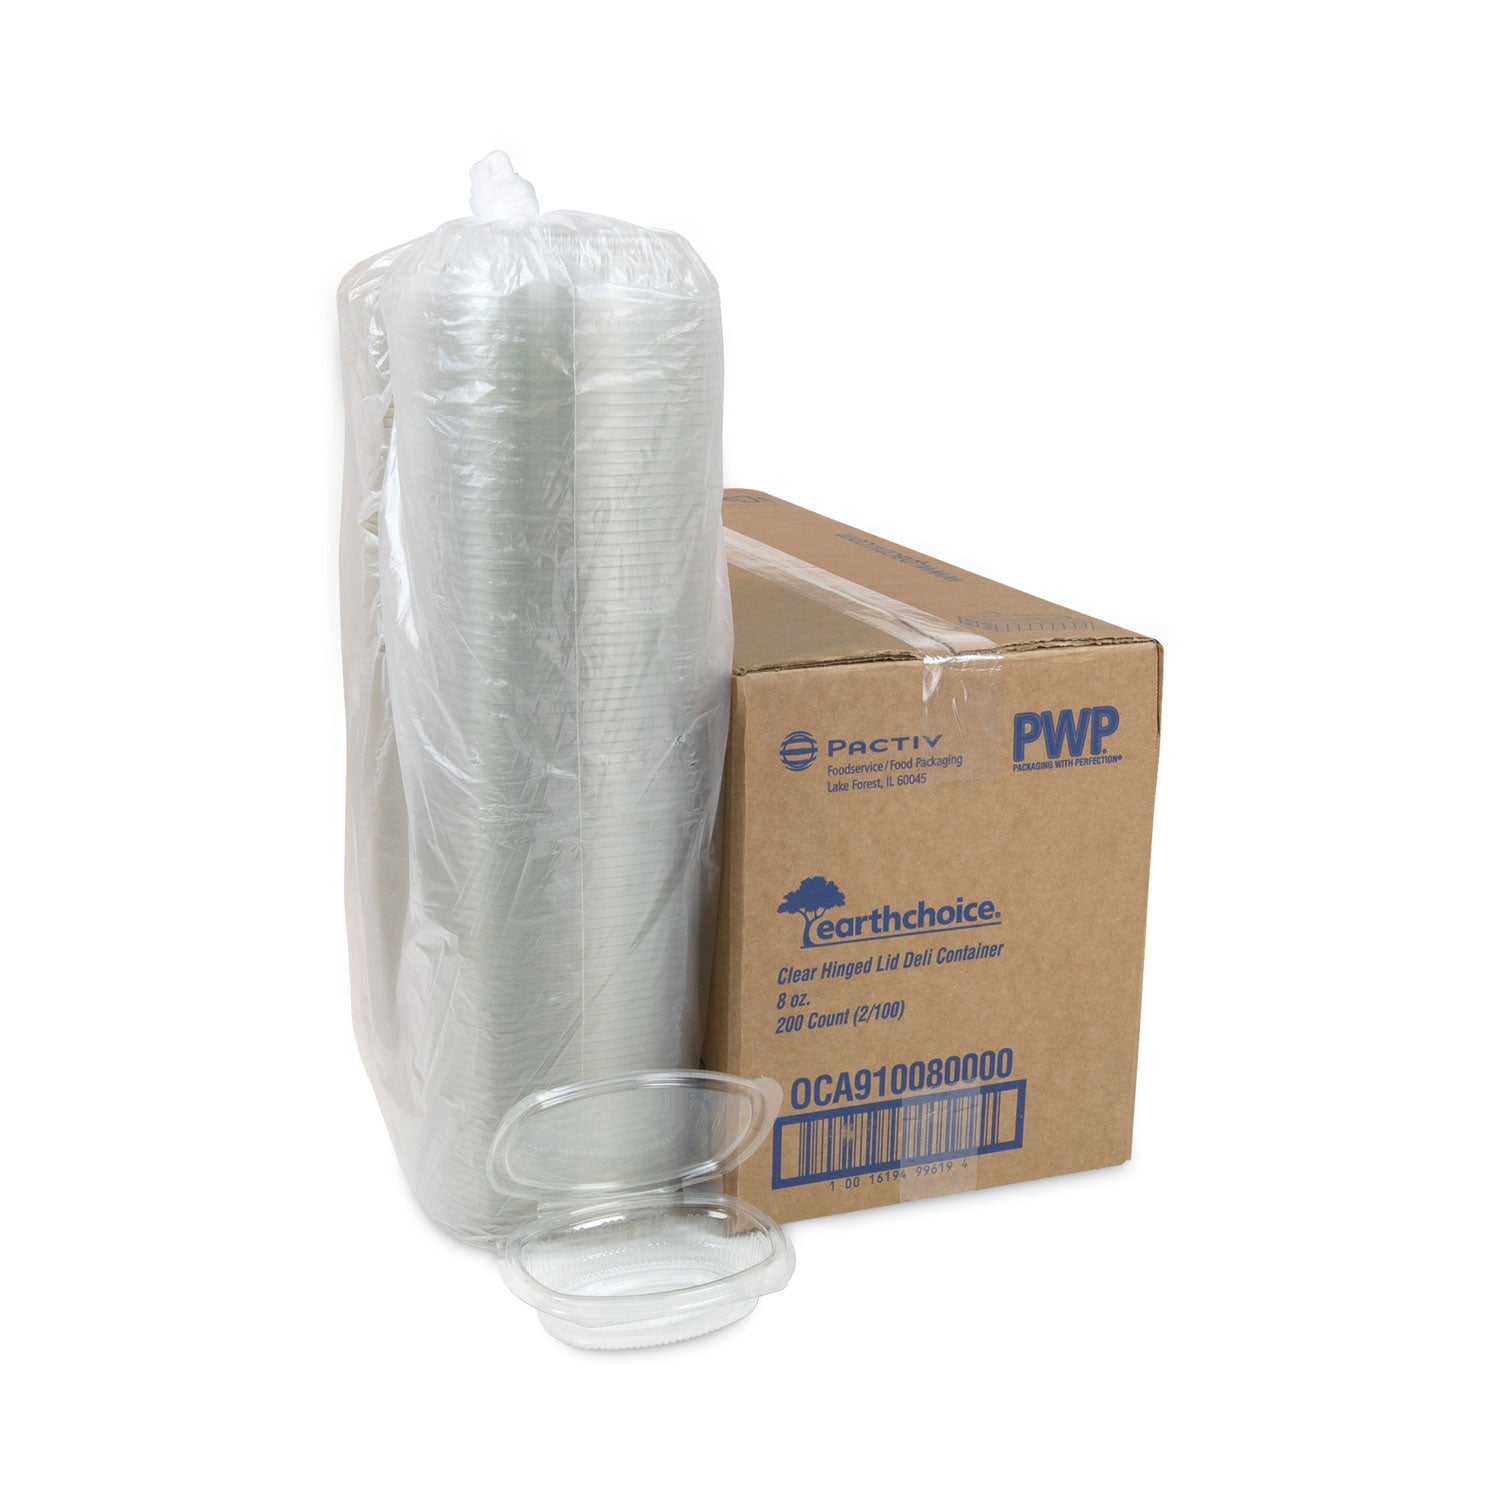 earthchoice-recycled-pet-hinged-container-8-oz-492-x-587-x-132-clear-plastic-200-carton_pct0ca910080000 - 5